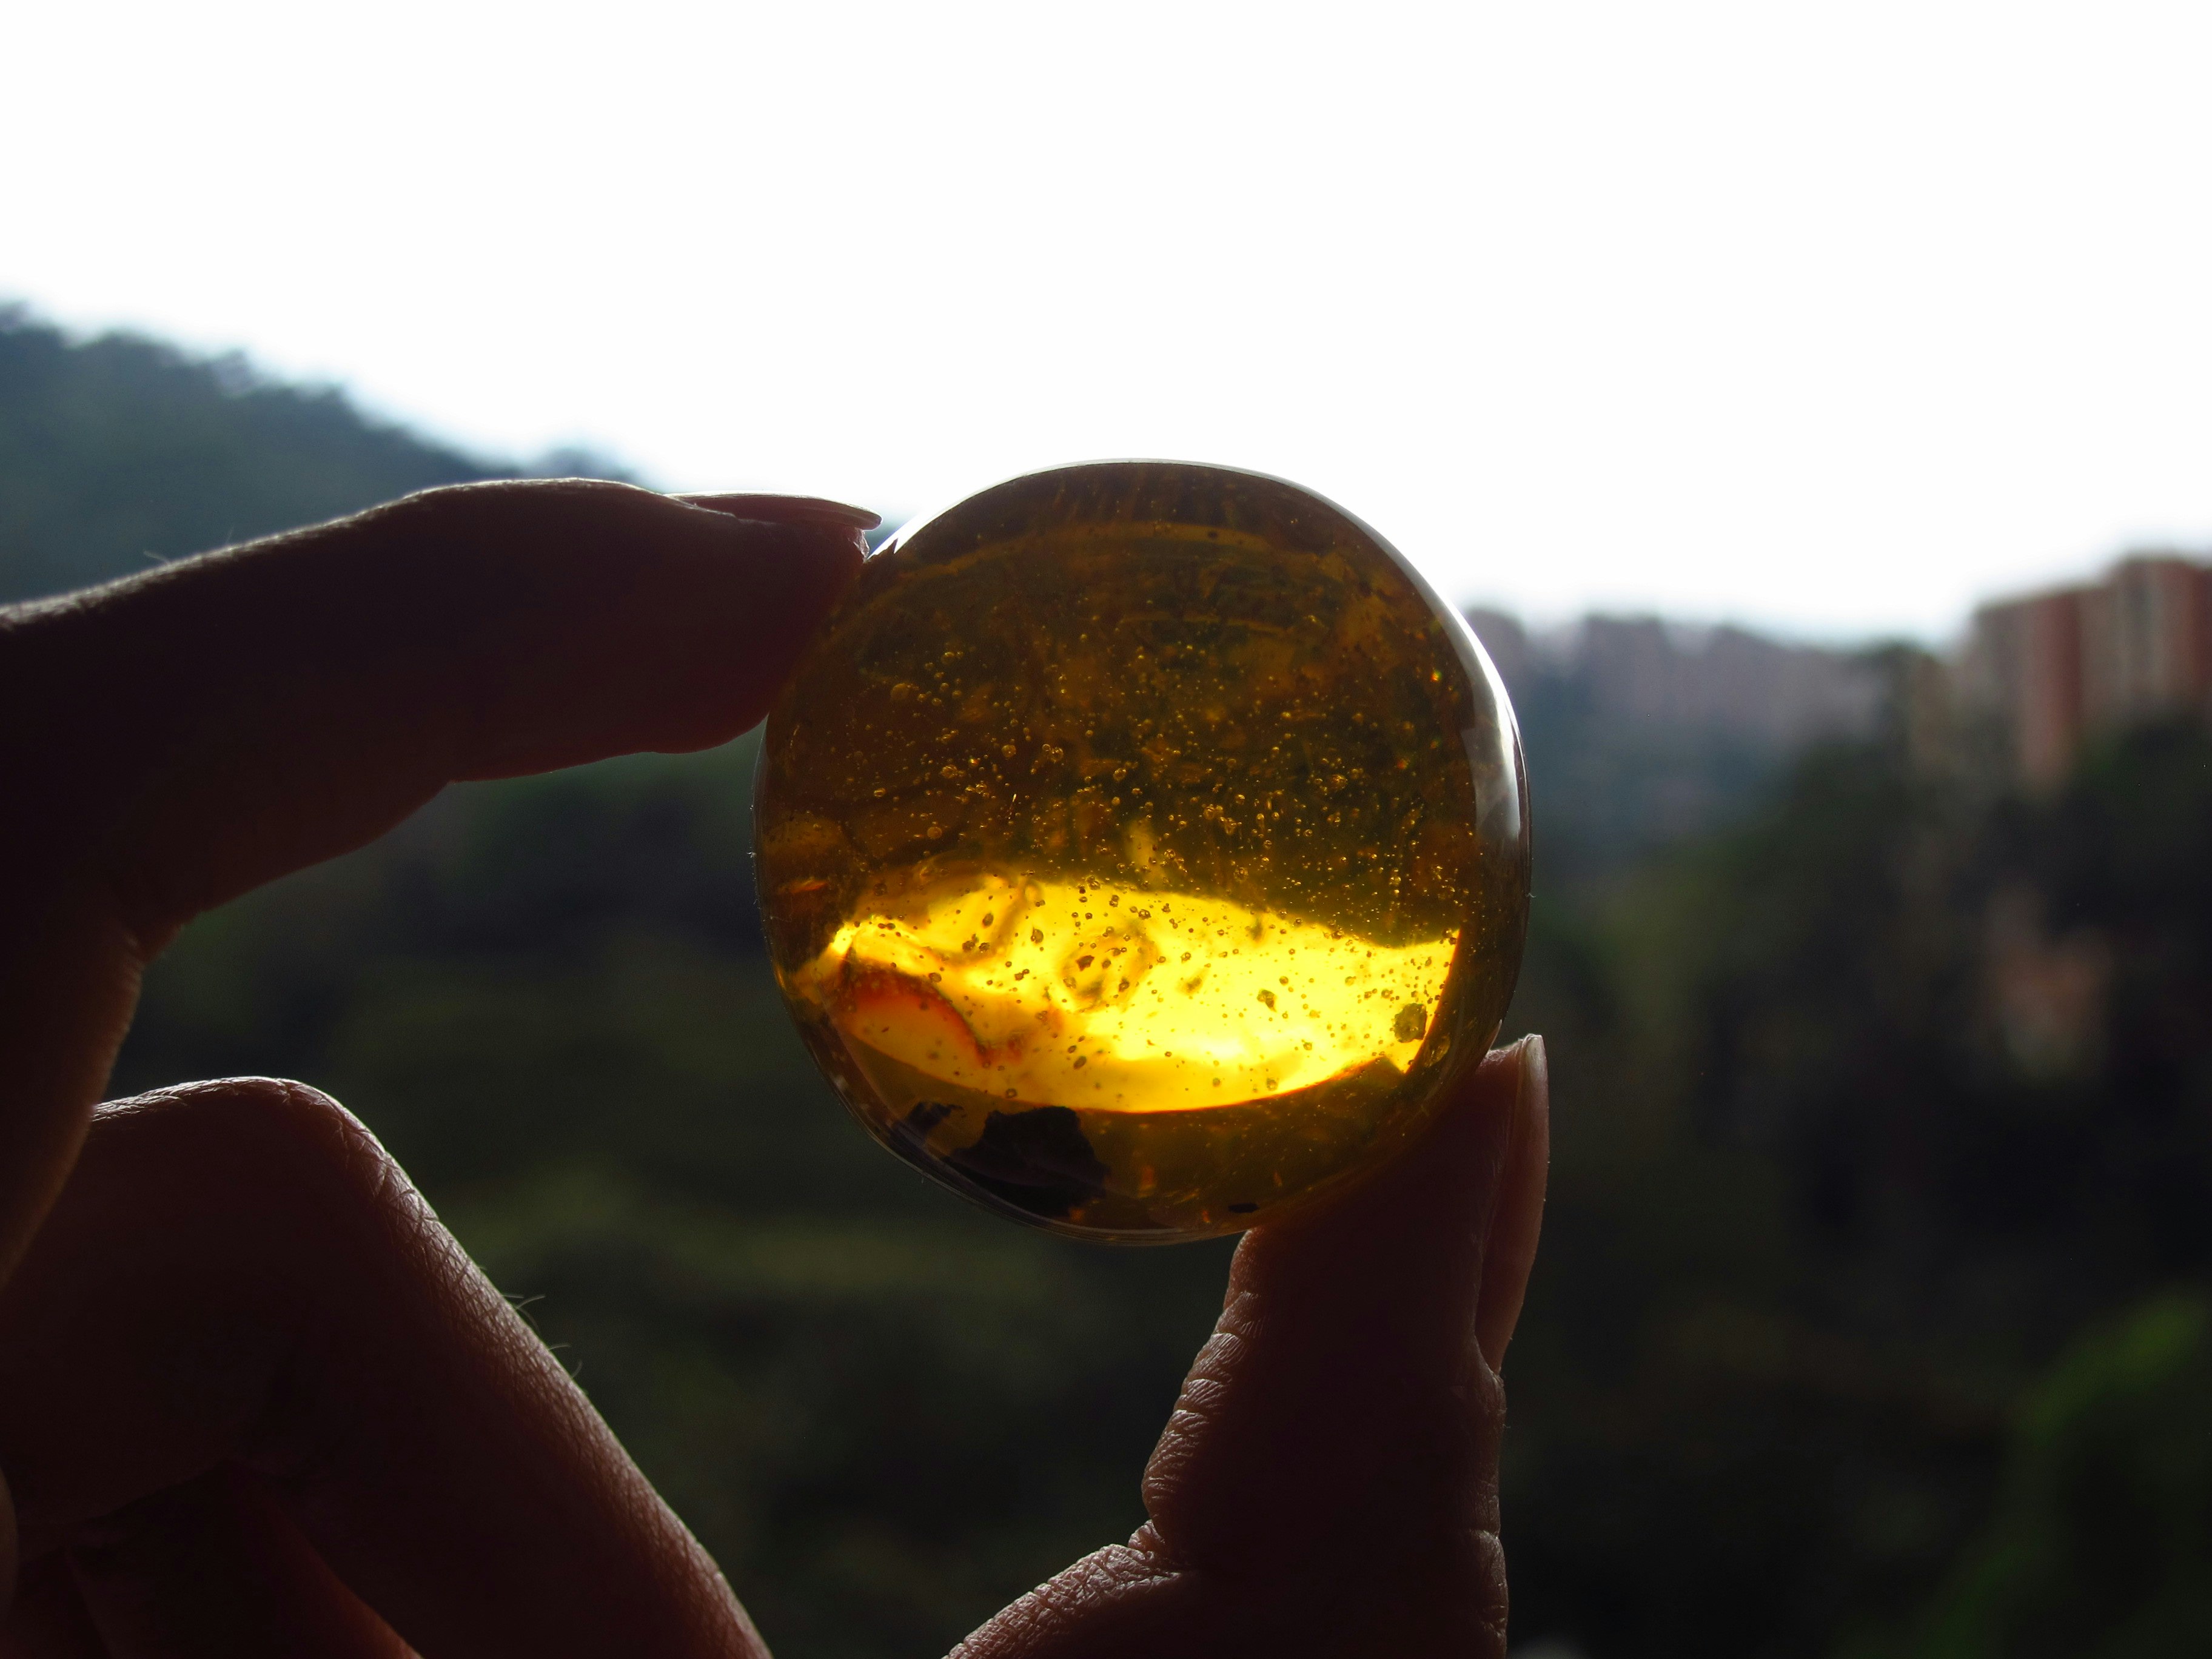 Where Is Amber Found?  Ancient Carved Ambers in the J. Paul Getty Museum